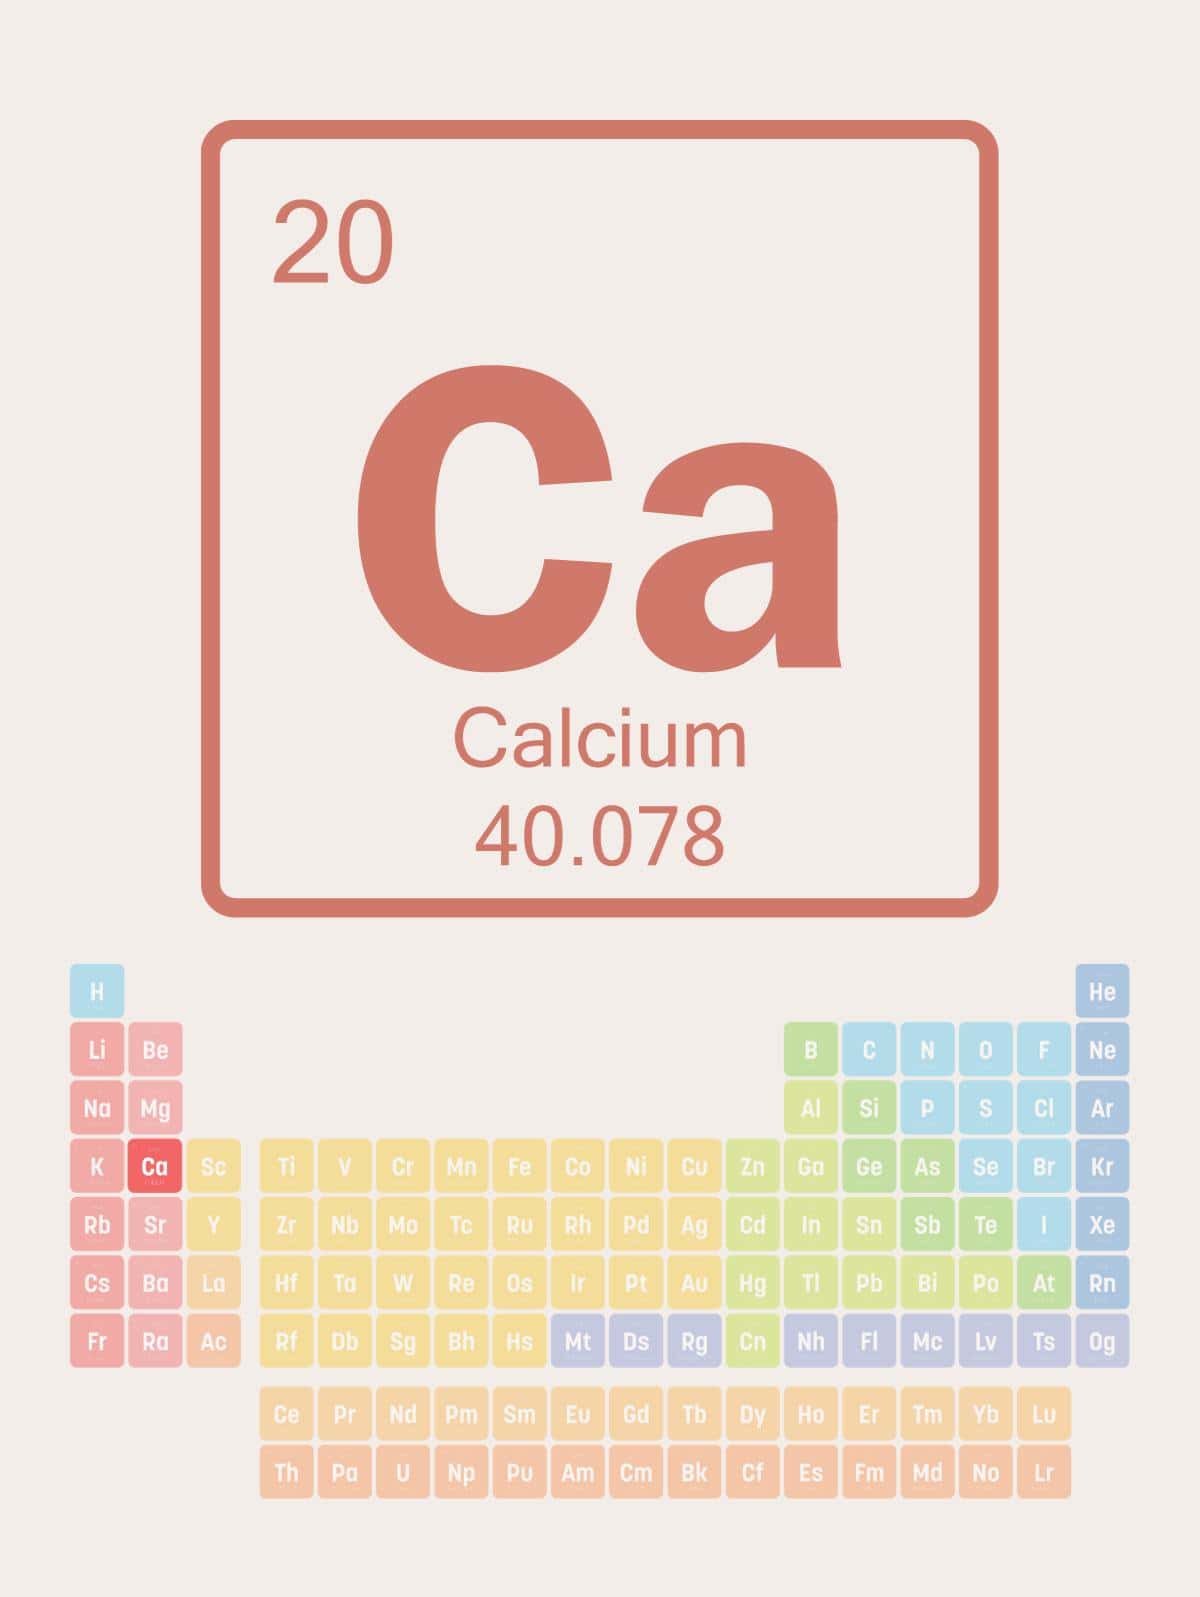 A graphic with the periodic table of elements with the element Calcium highlighted. 